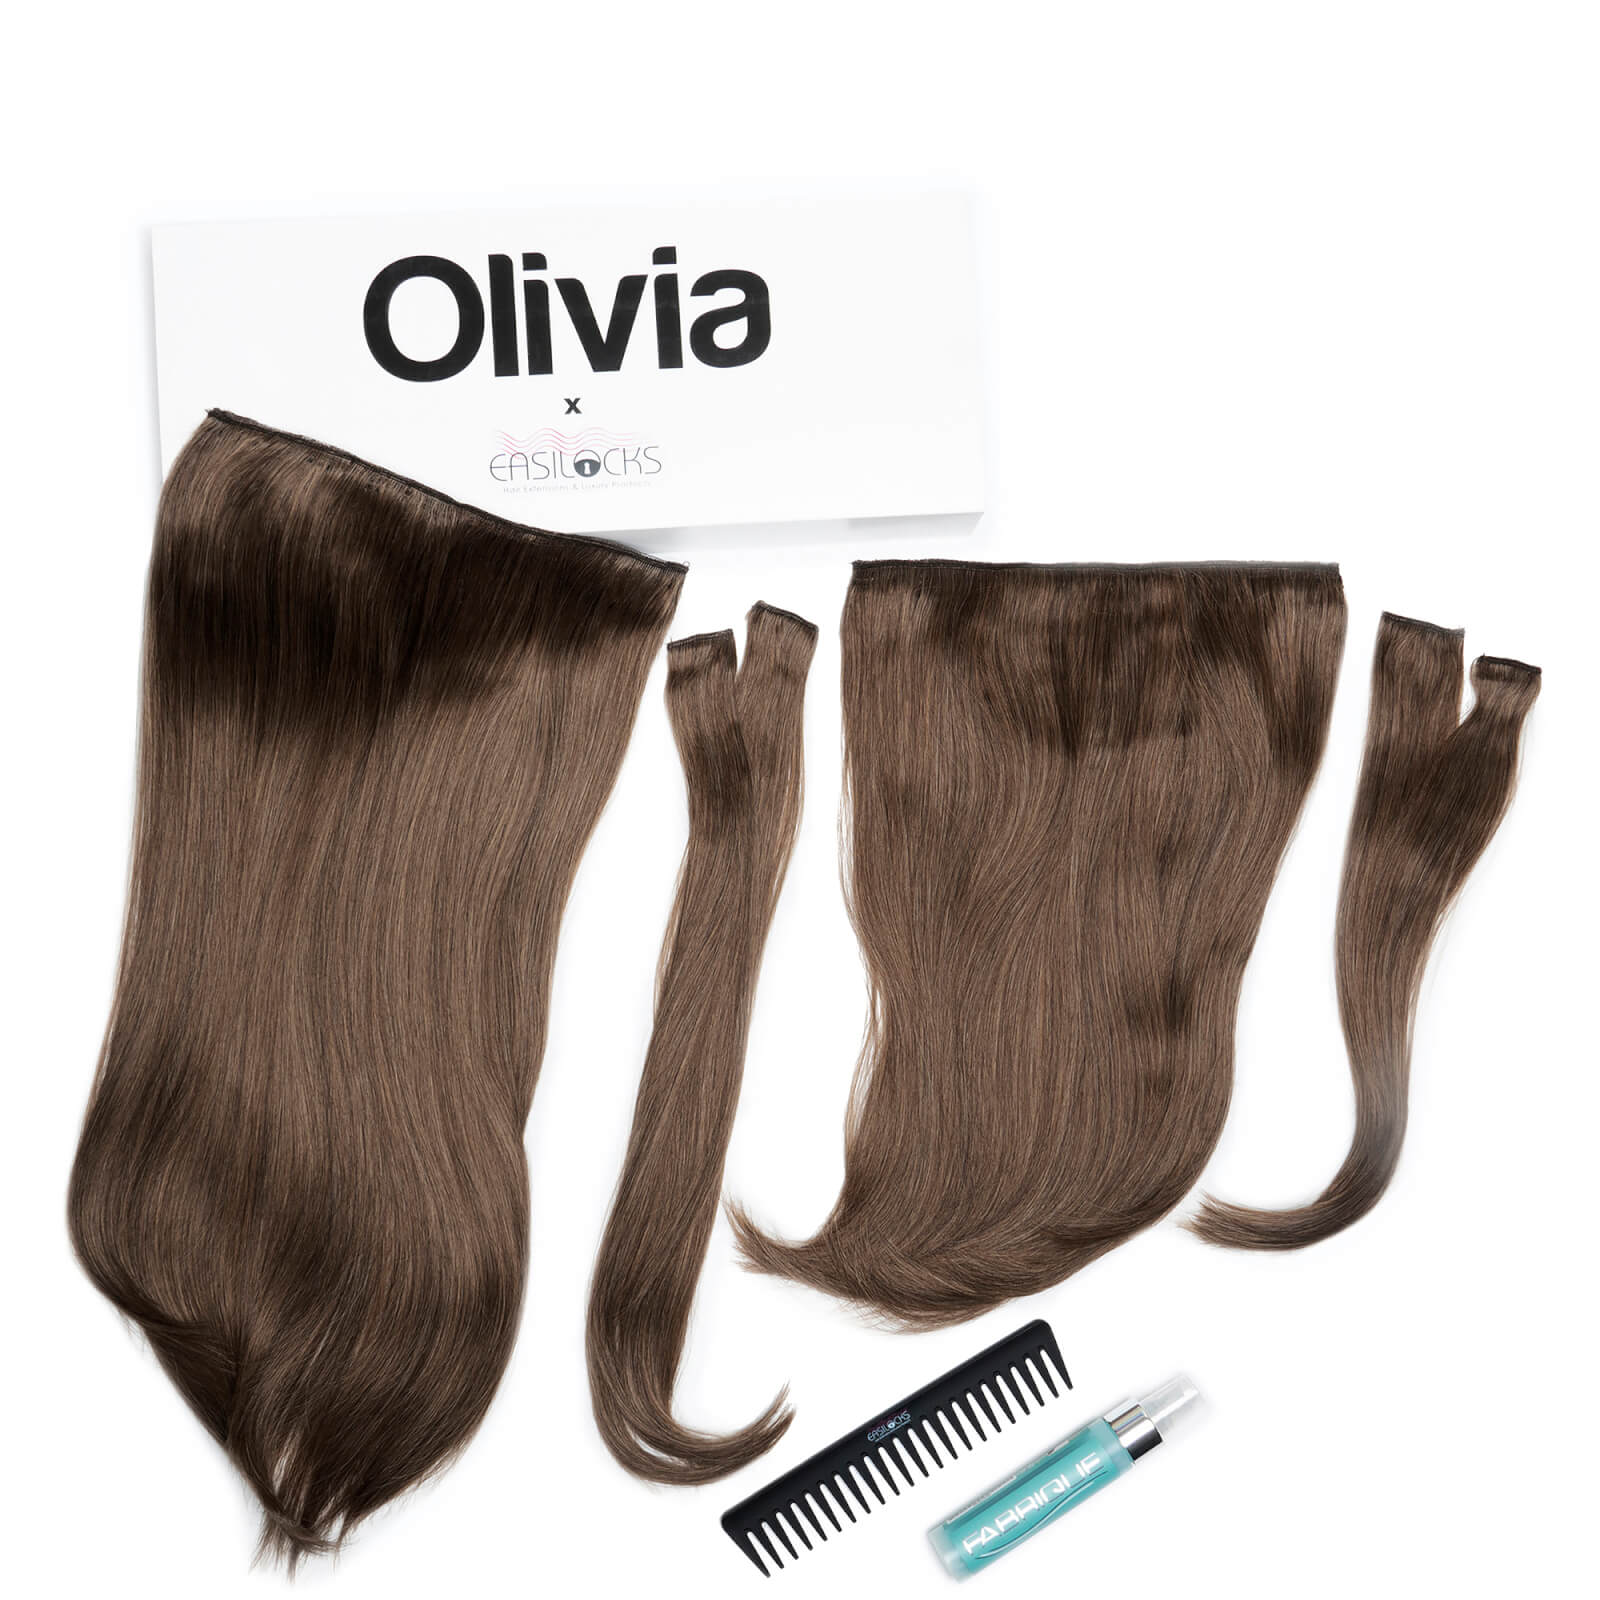 Olivia X Easilocks Straight Collection (Various Options) - Brown Cocoa